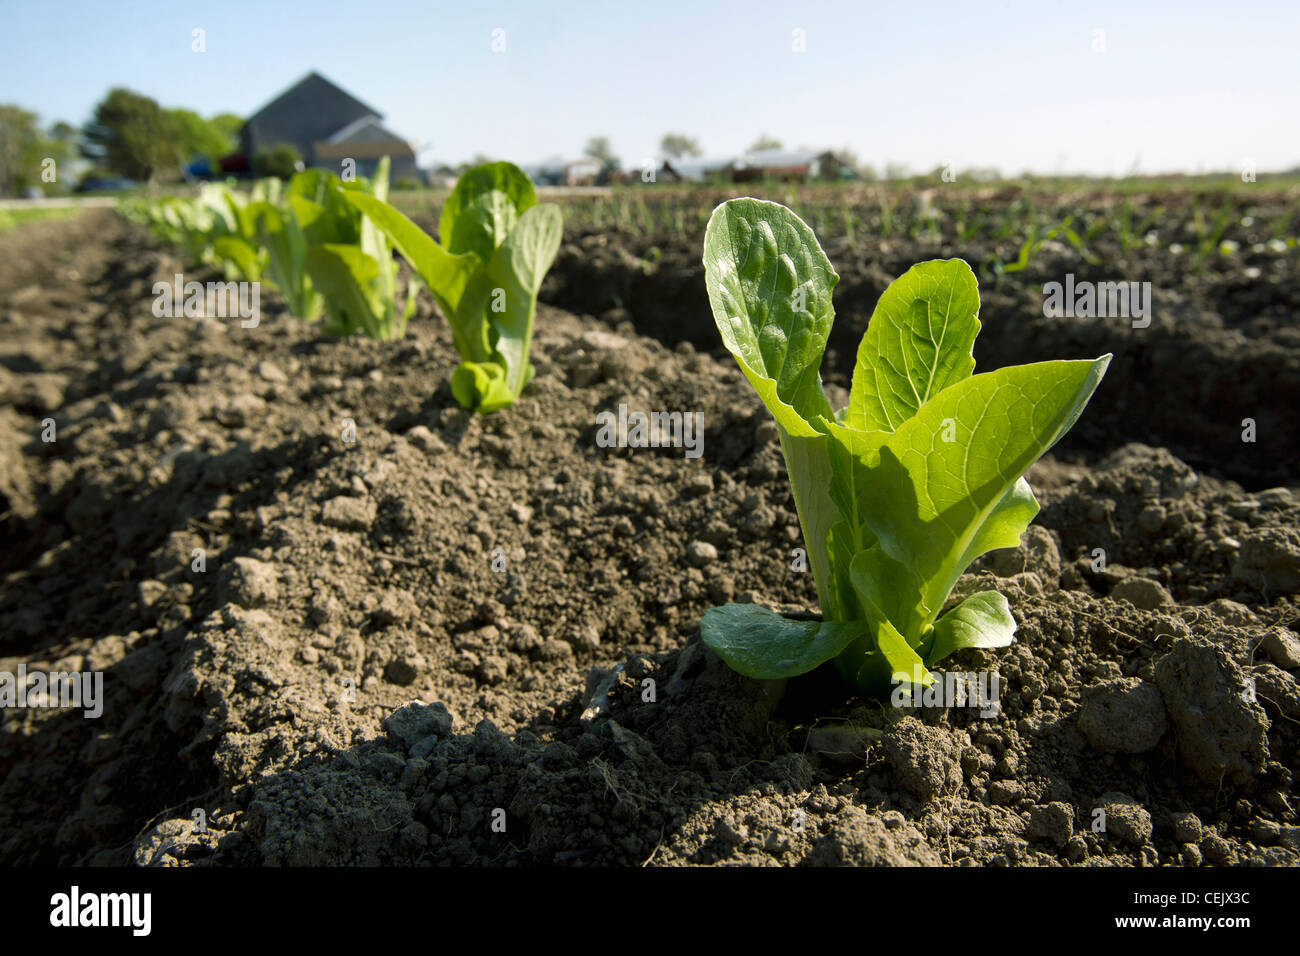 A row of early growth romaine lettuce plants with a row of onion seedlings in the next row at a local family produce farm. Stock Photo